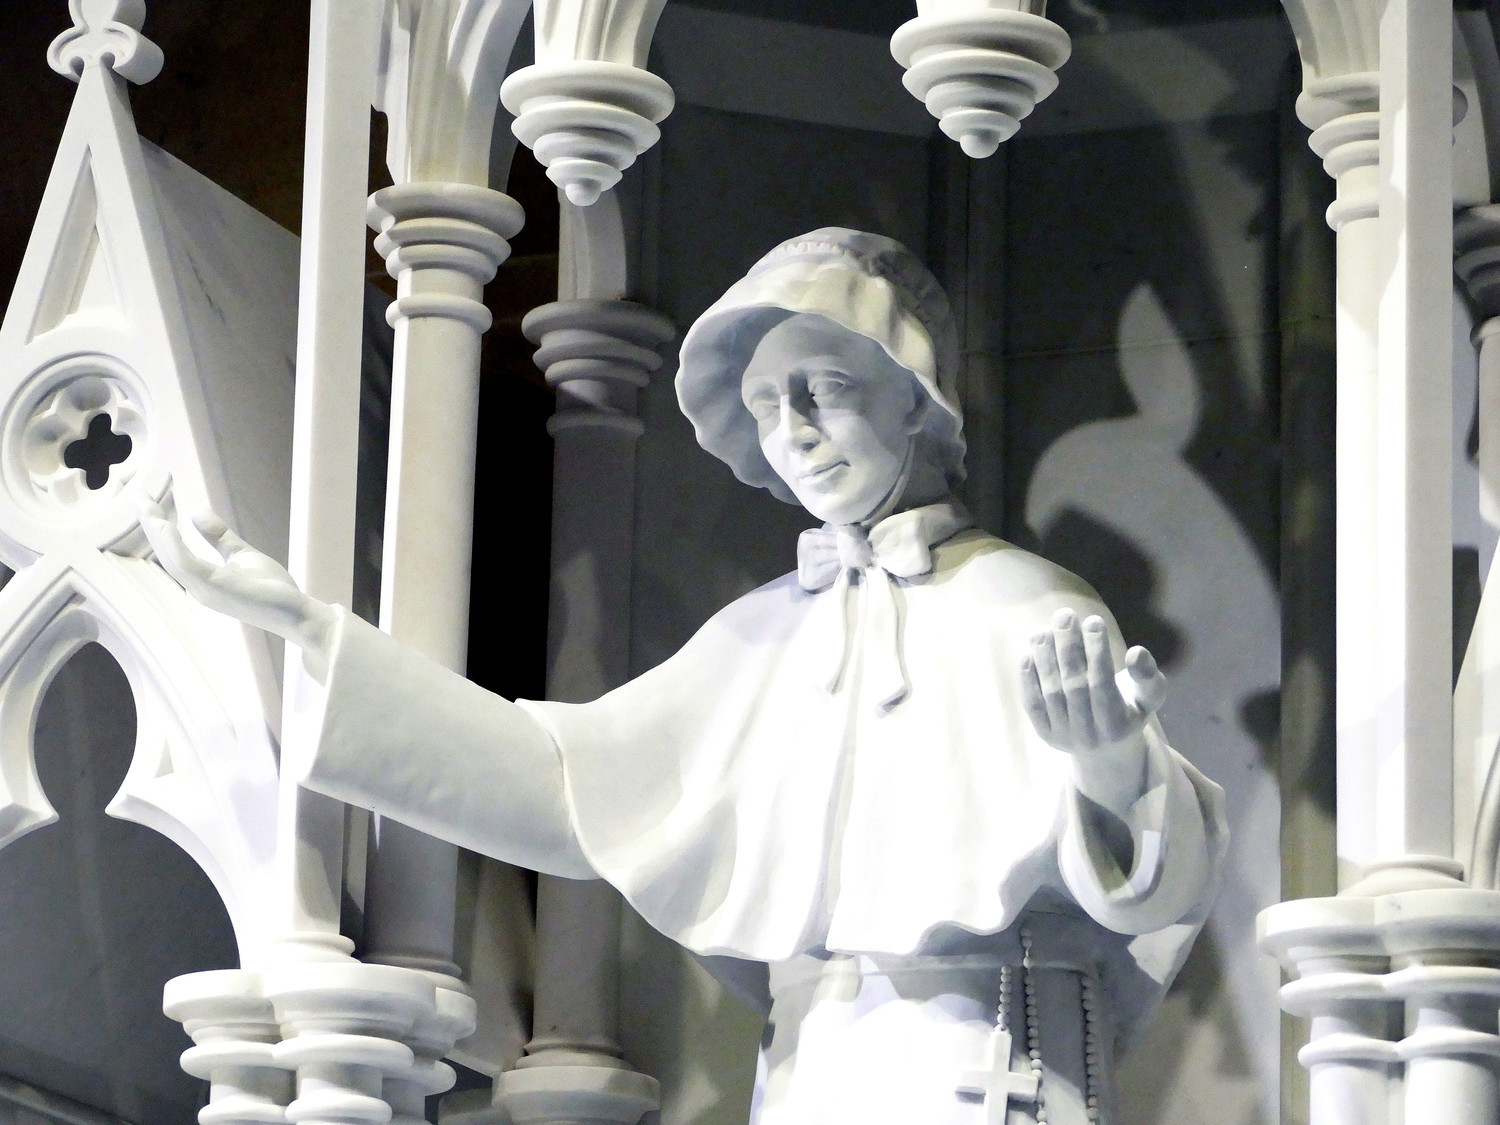 Mother Seton, a native New Yorker who founded the Sisters of Charity of New York 200 years ago and was later canonized as the first American-born saint, is depicted in the statue.